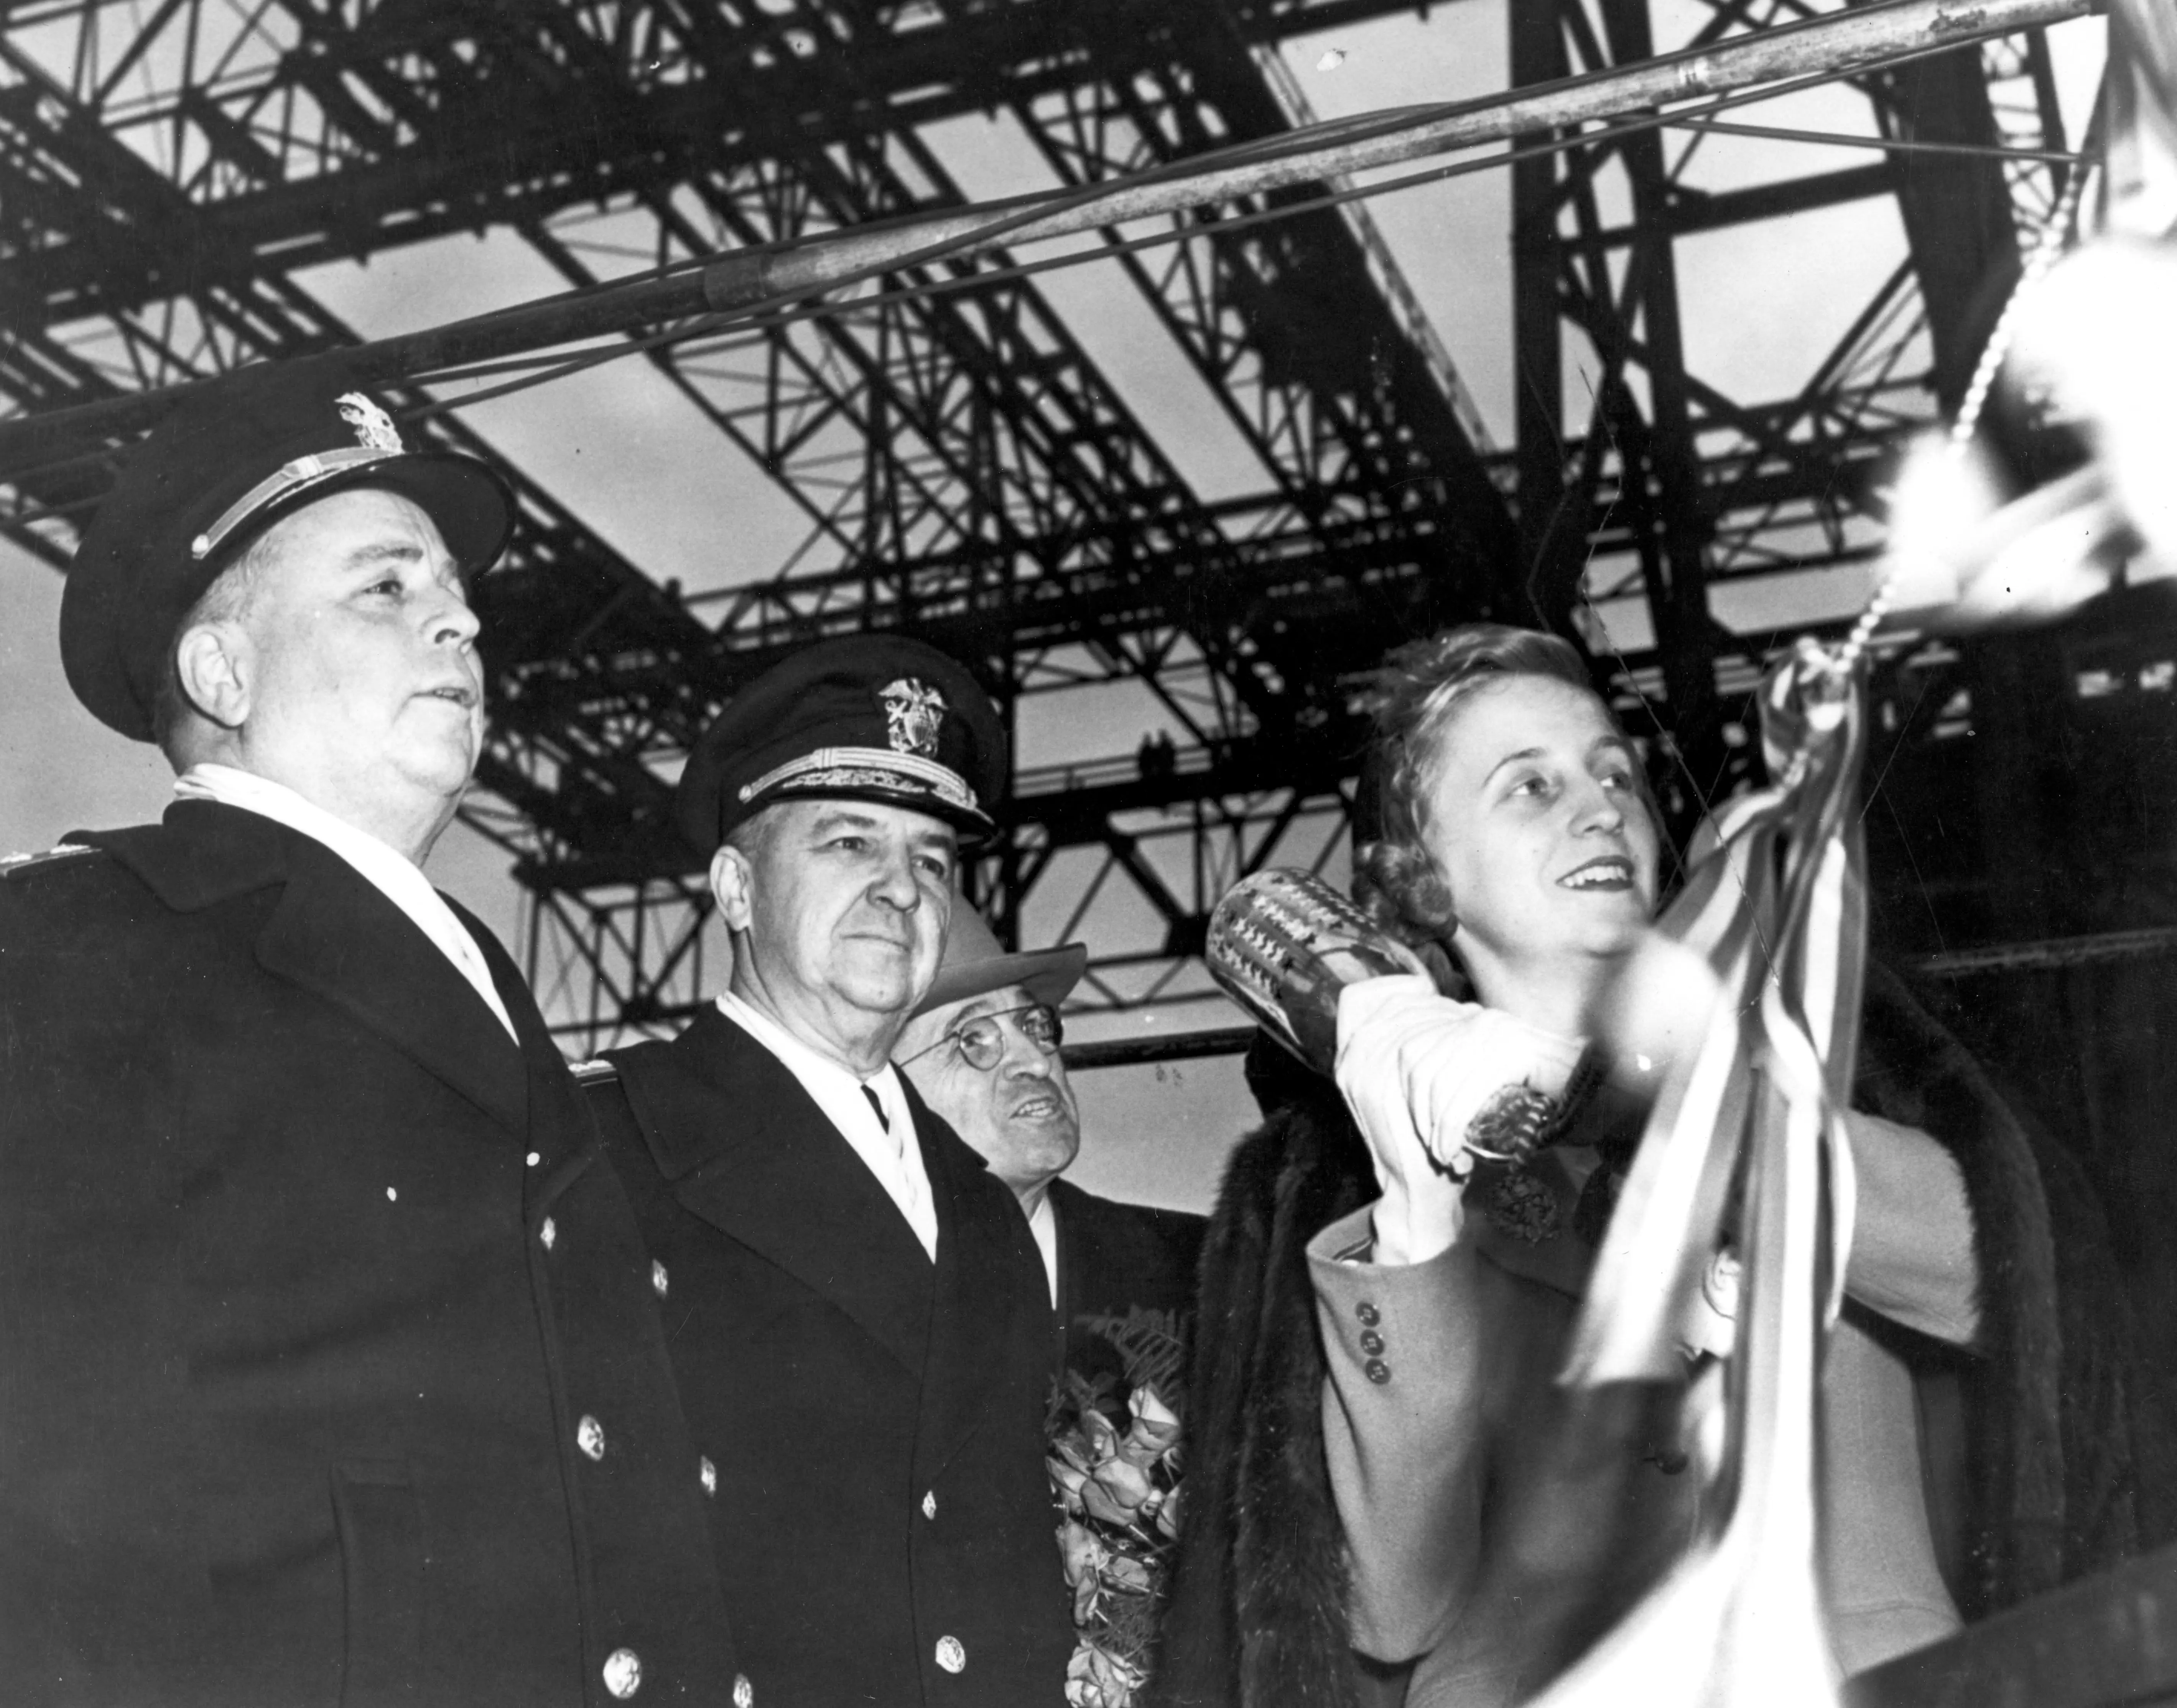 A black and white photograph of a ship launching ceremony, with a woman swinging a champagne bottle as three men watch. Two of the men are admirals in uniform.